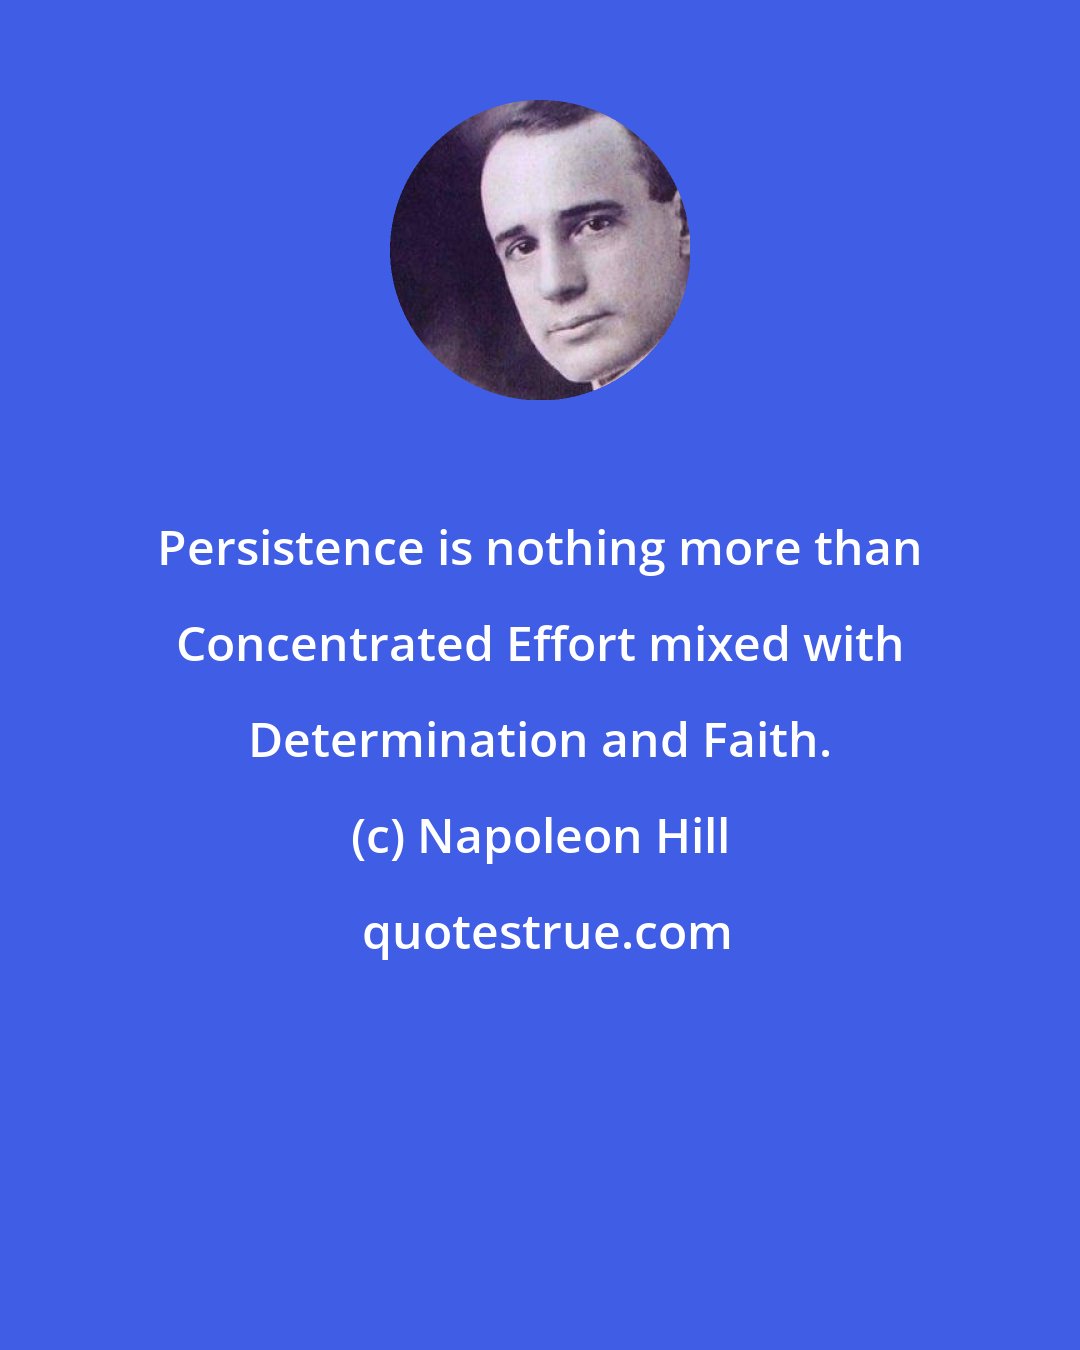 Napoleon Hill: Persistence is nothing more than Concentrated Effort mixed with Determination and Faith.